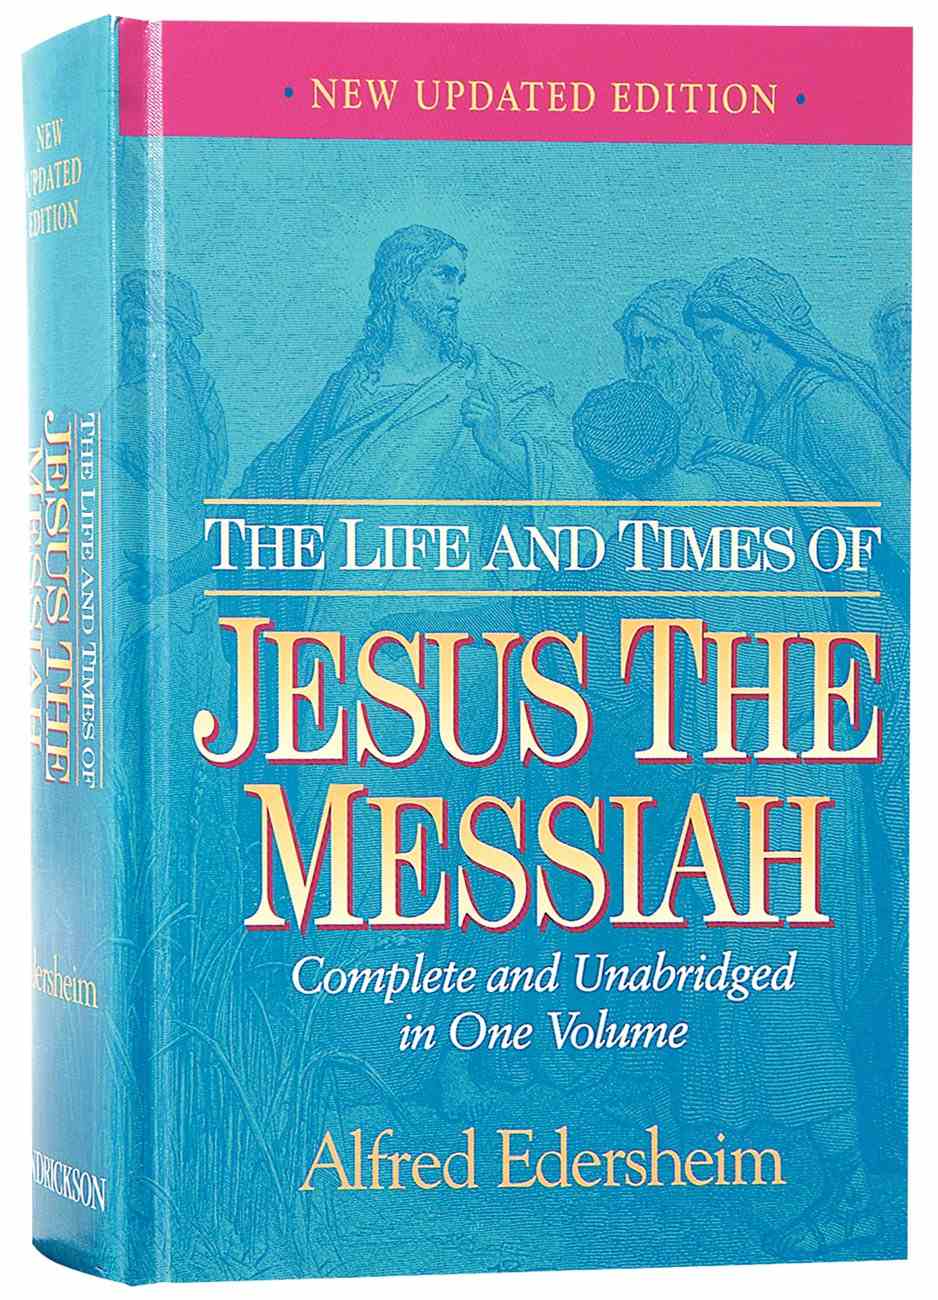 capture finish coil The Life and Times of Jesus the Messiah (1993) by Alfred Edersheim | Koorong